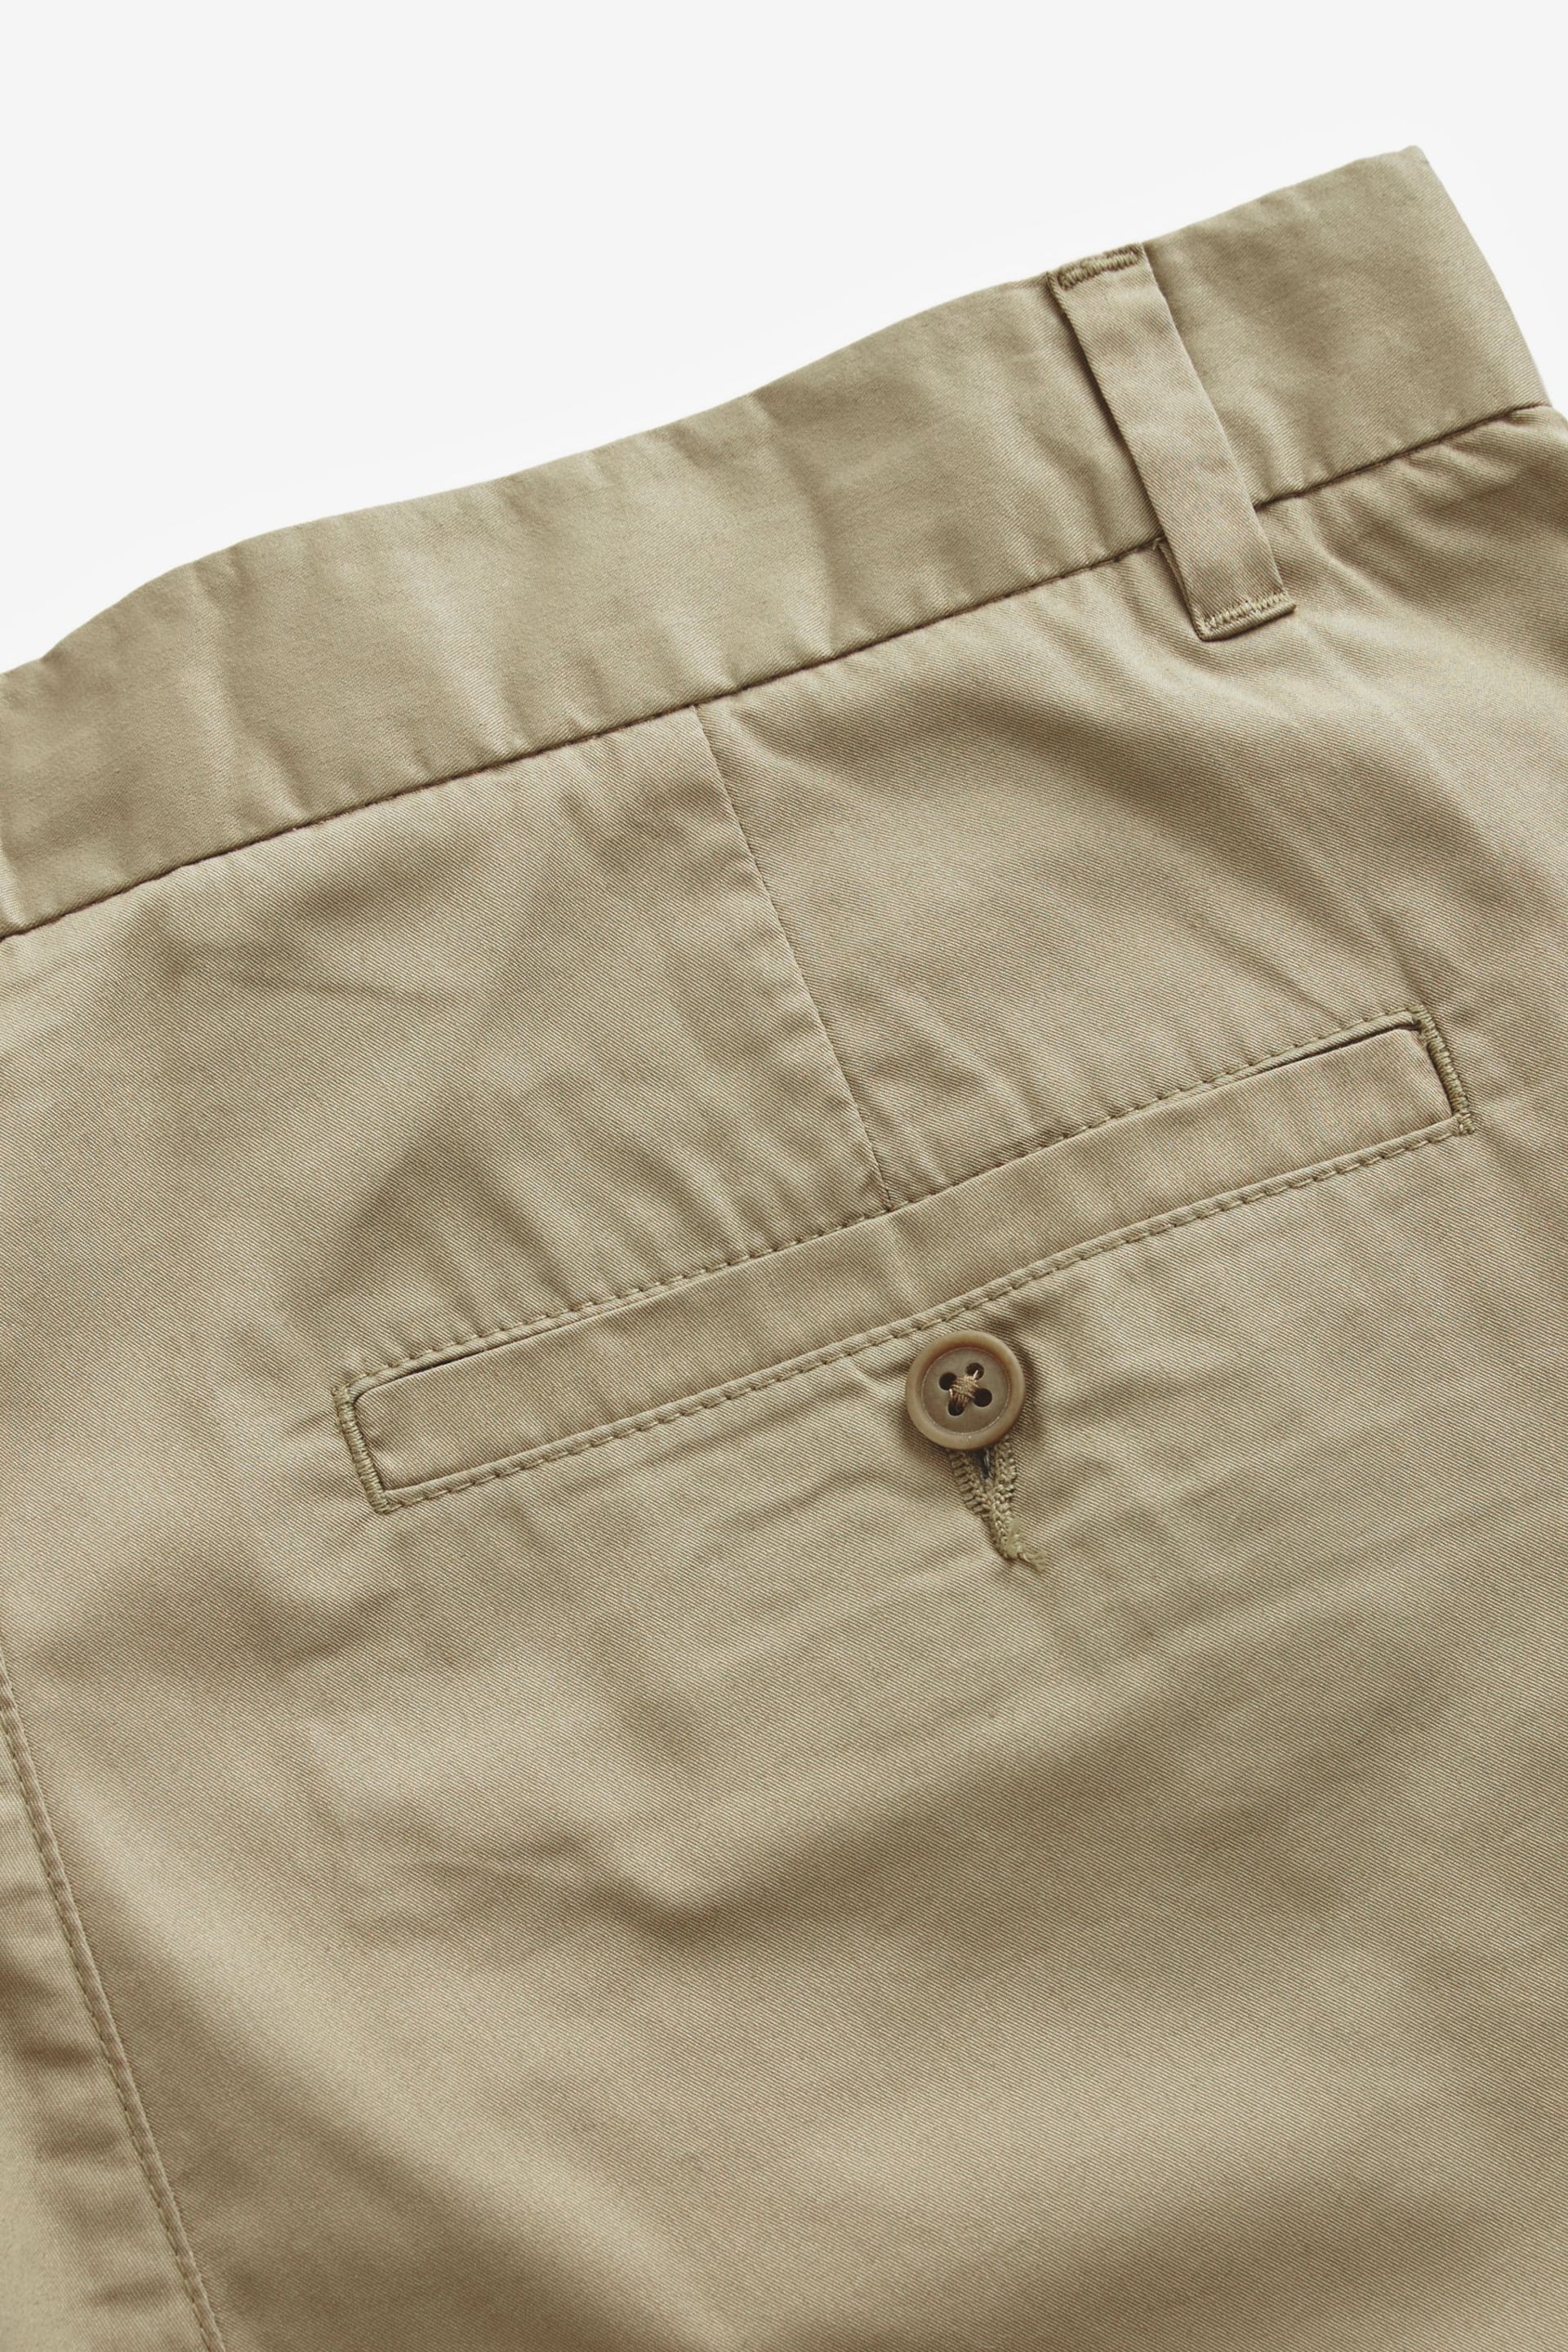 Stone Straight Lightweight Stretch Chino Trousers - Image 7 of 9